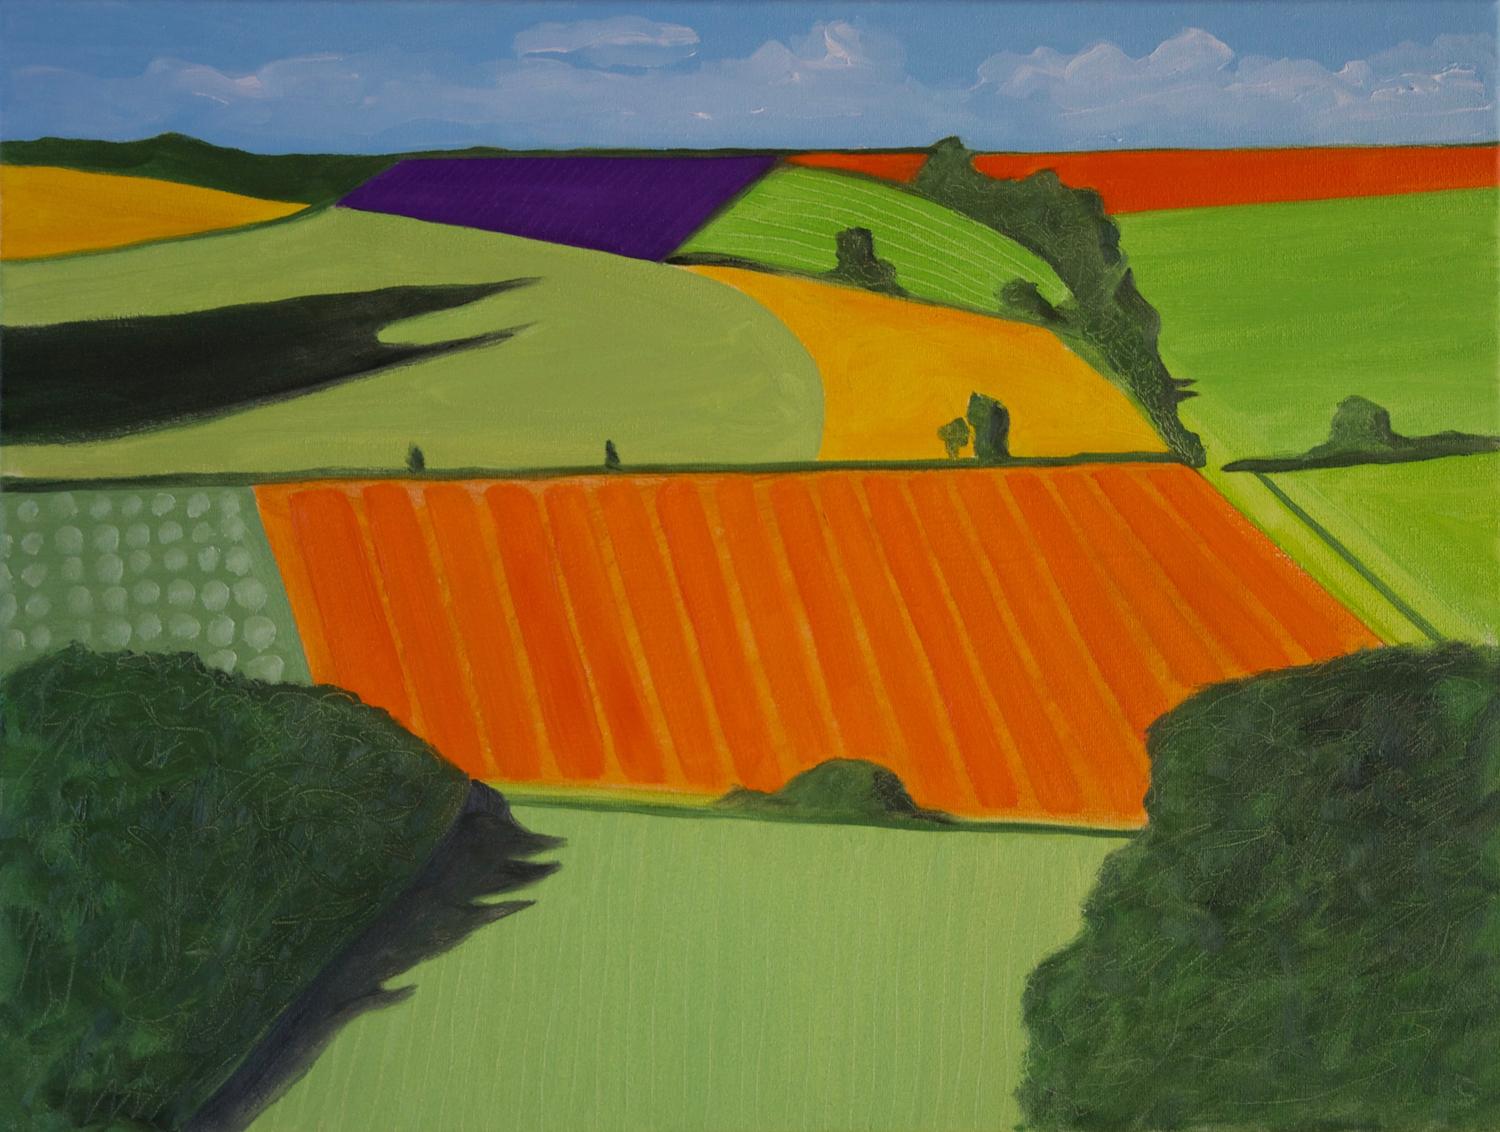 Christo Sharpe discovered this image with perfectly divided shapes when visiting friends in Warwickshire. This landscape painting is the result. This is one of Englands most beautiful areas. The countryside is perfectly composed with sweeping